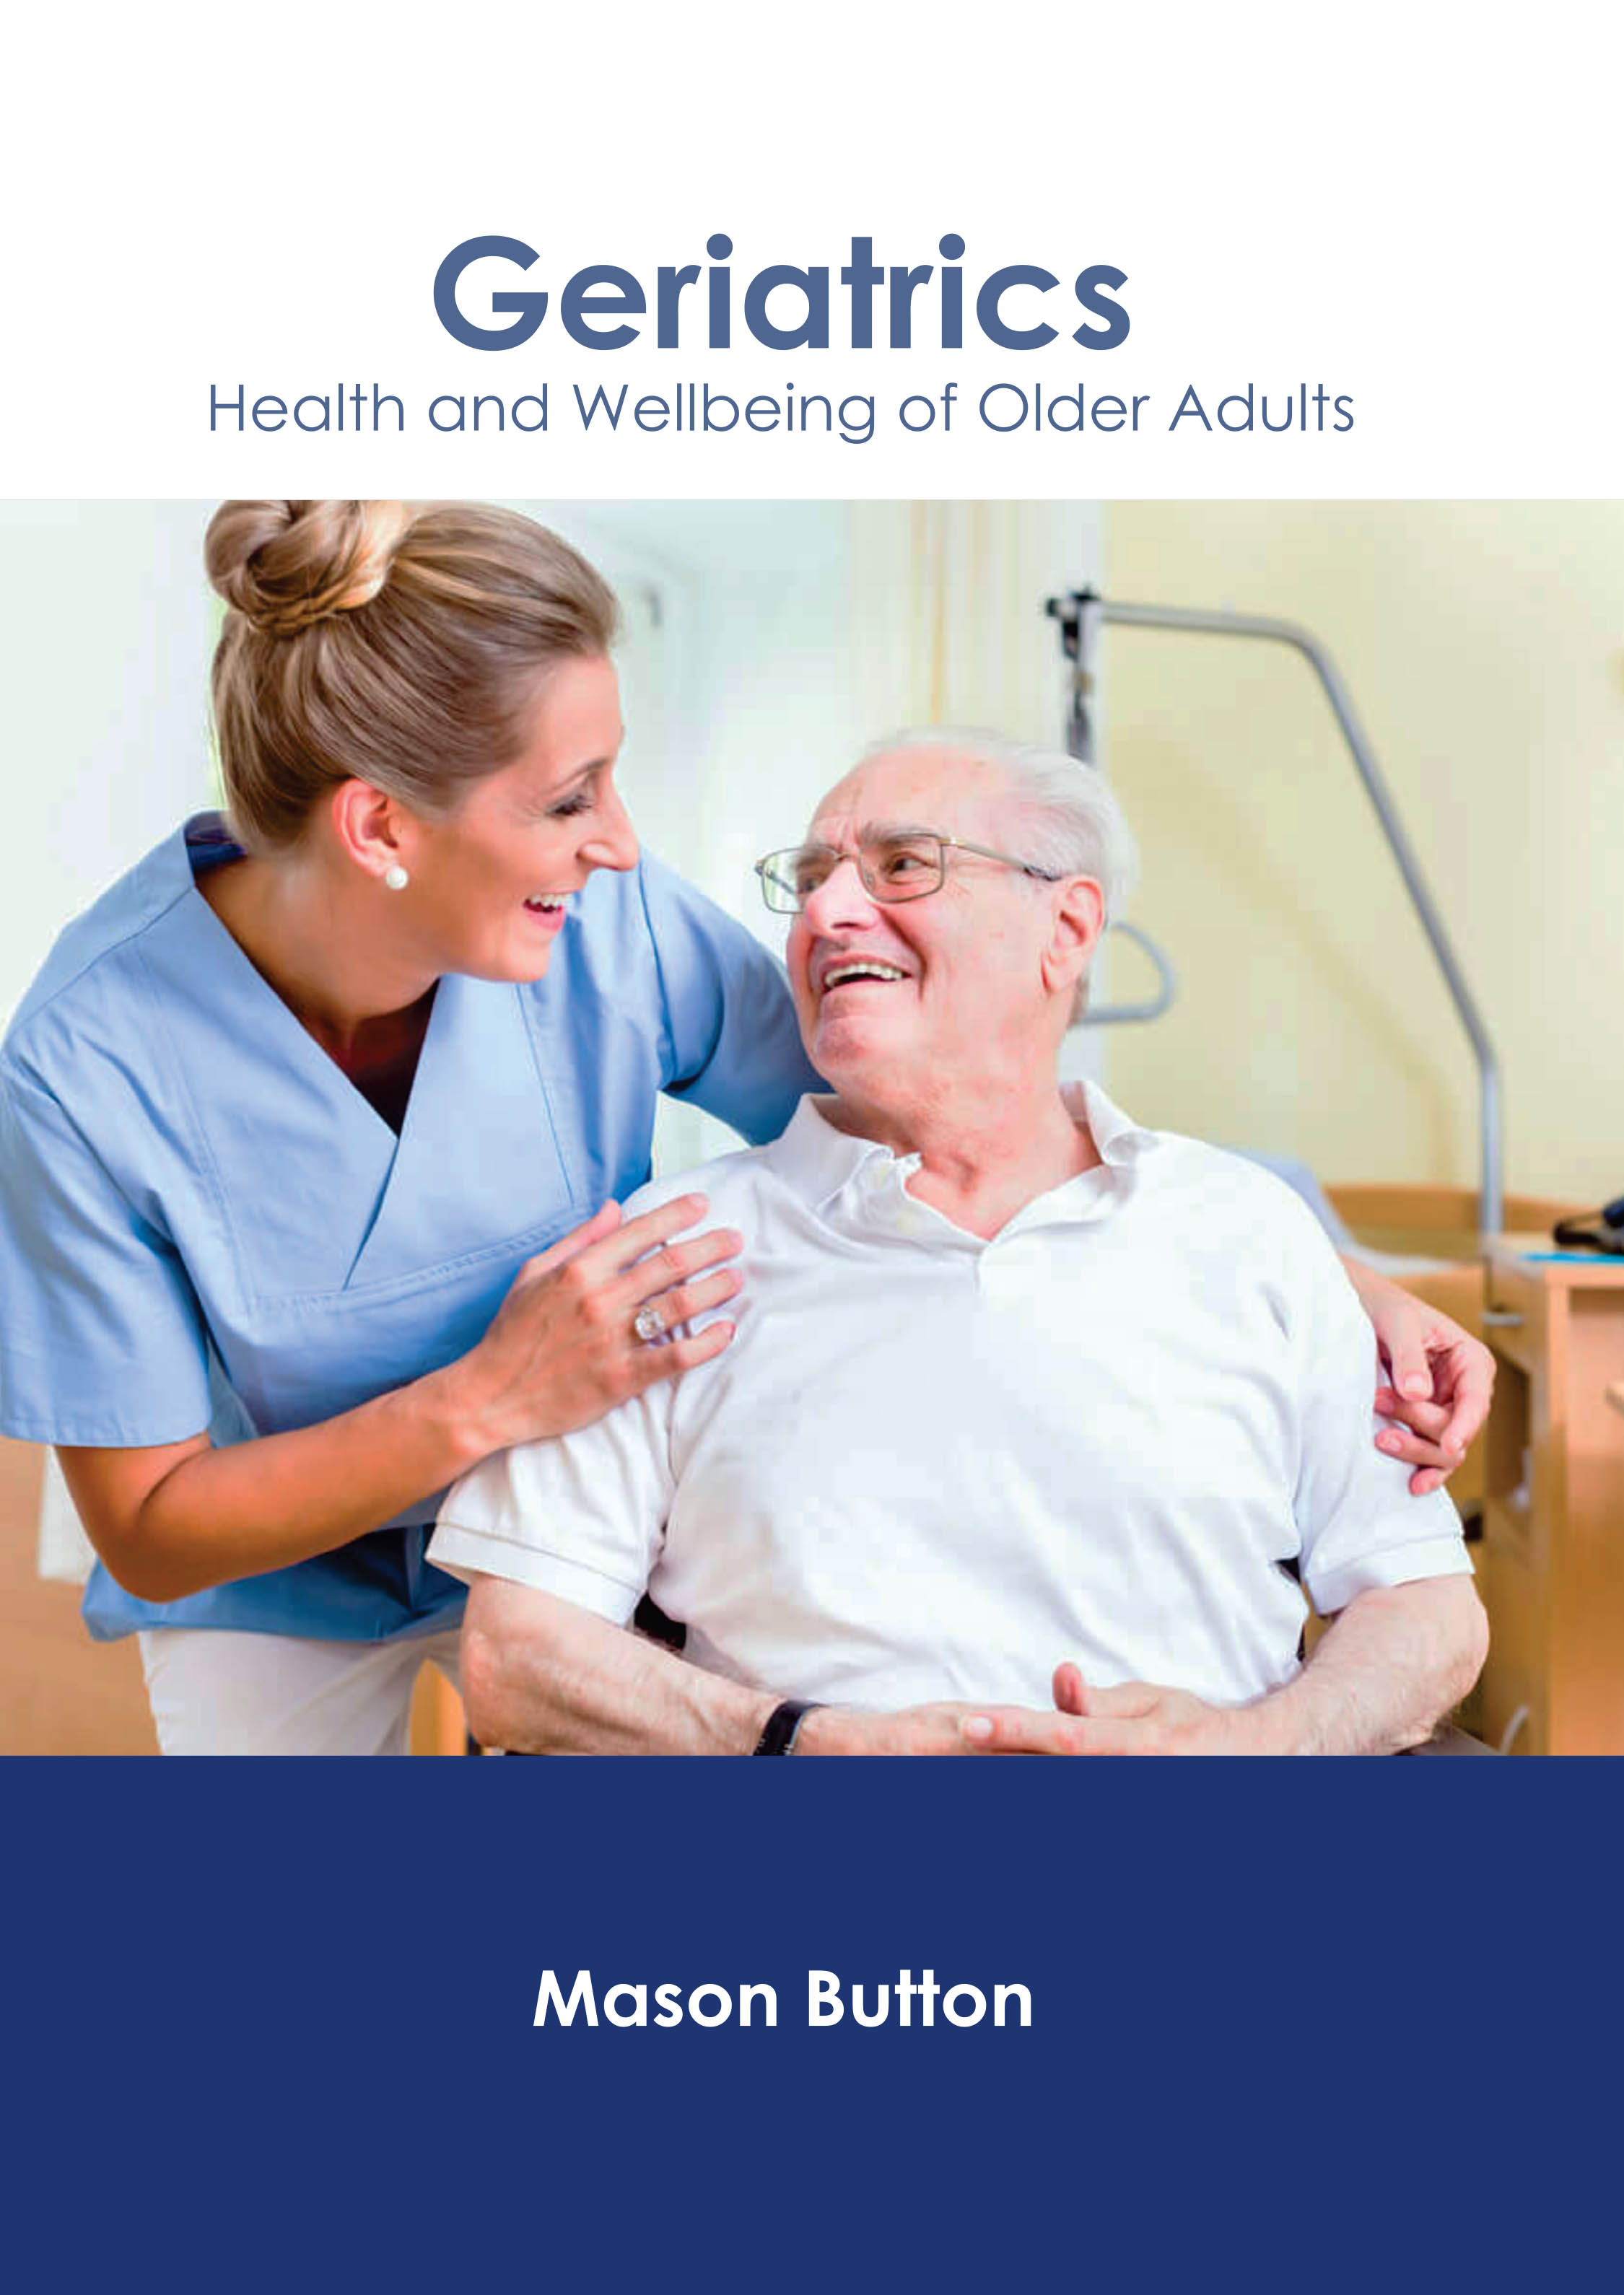 GERIATRICS: HEALTH AND WELLBEING OF OLDER ADULTS